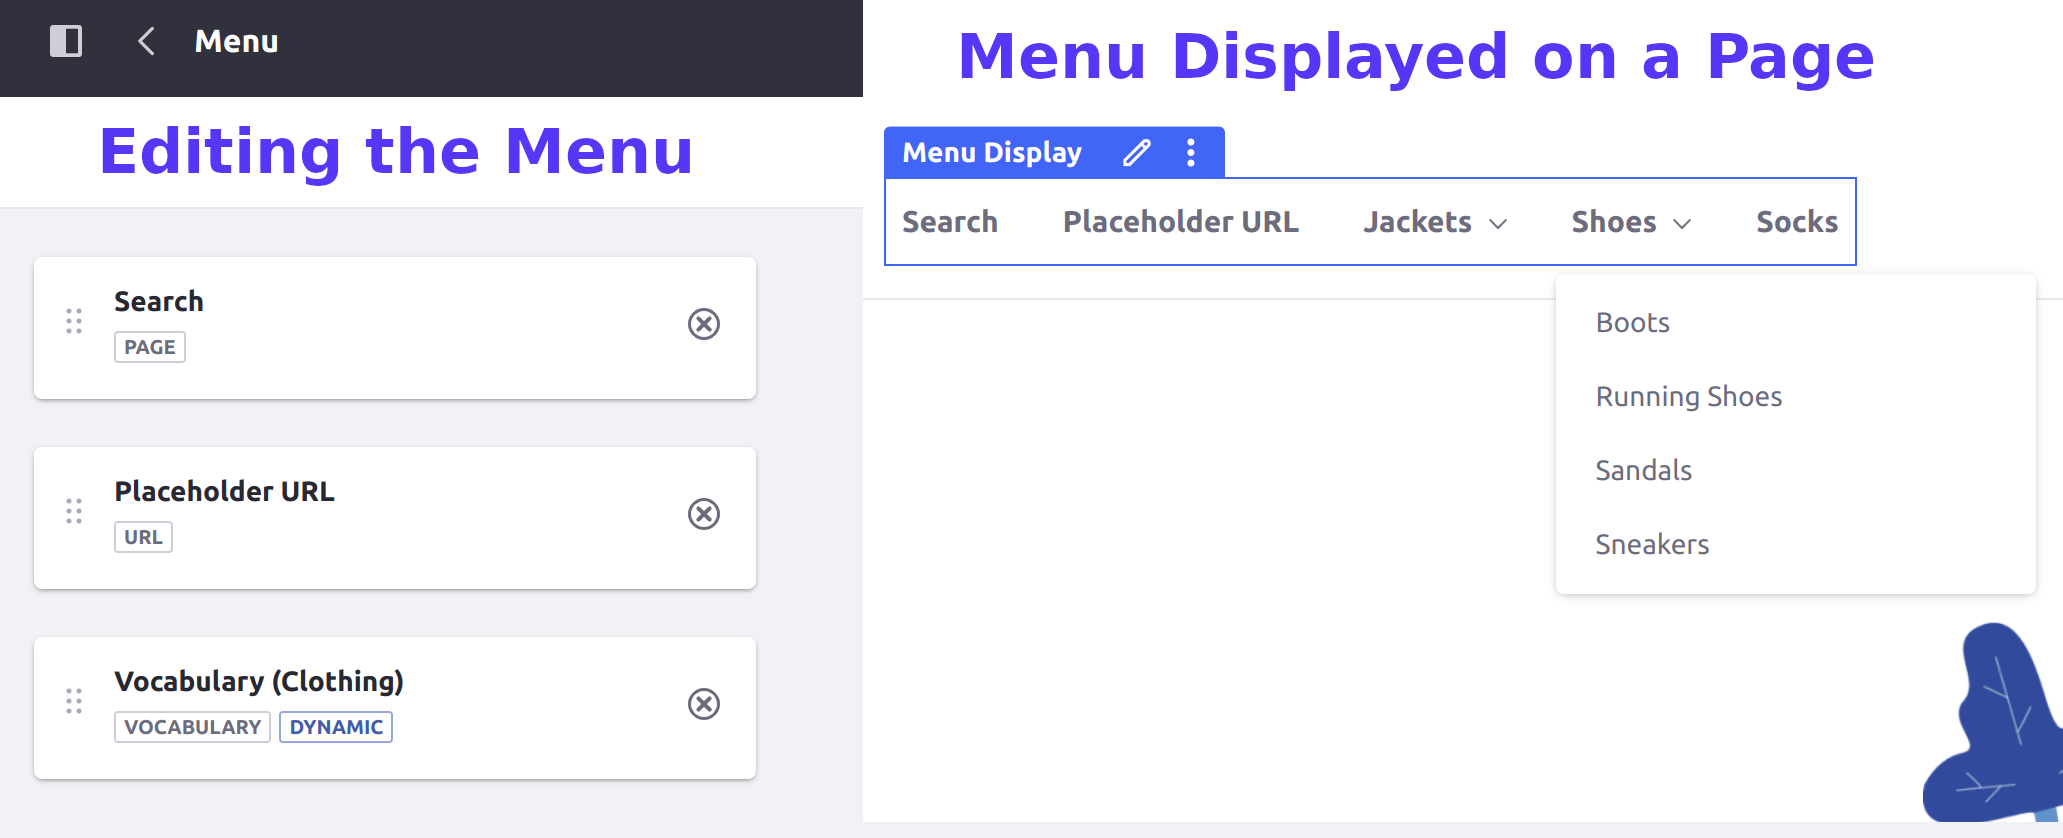 Preview a Navigation Menu to see how it looks when displayed on a page.